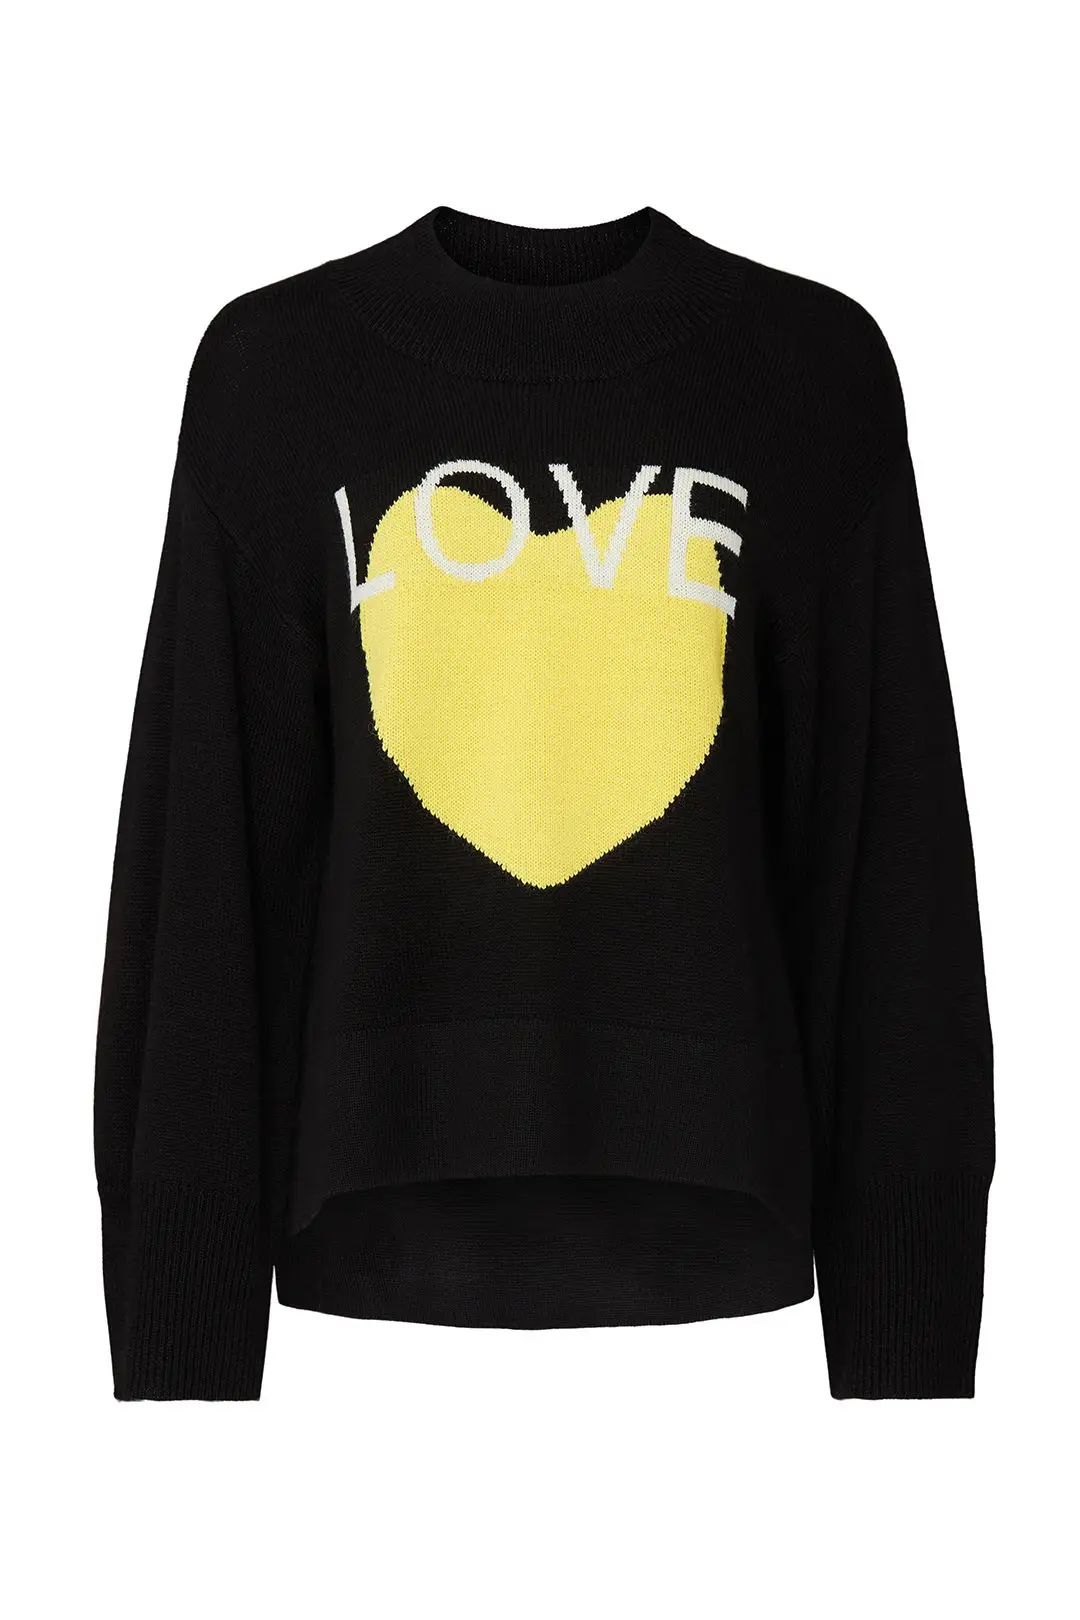 Love Graphic Sweater | Rent The Runway